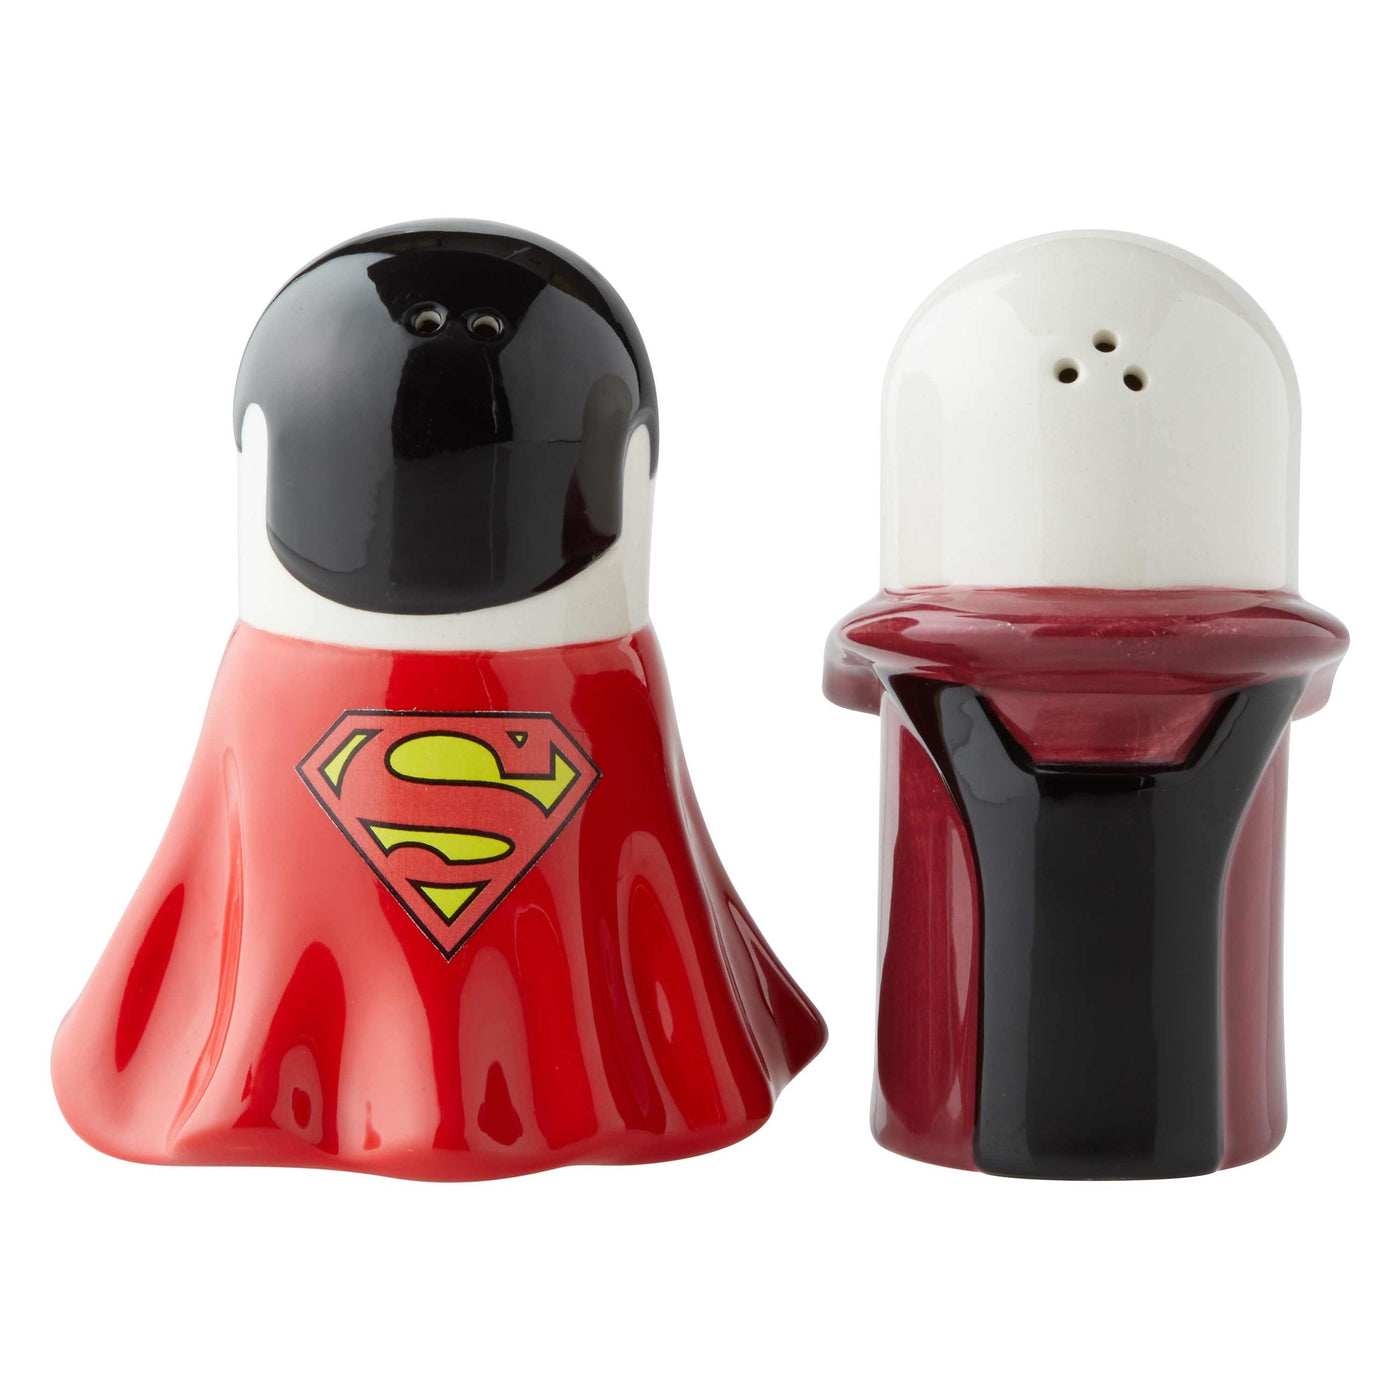 DC Comics Stylized Superman vs Lex Luthor Salt and Pepper New with Box